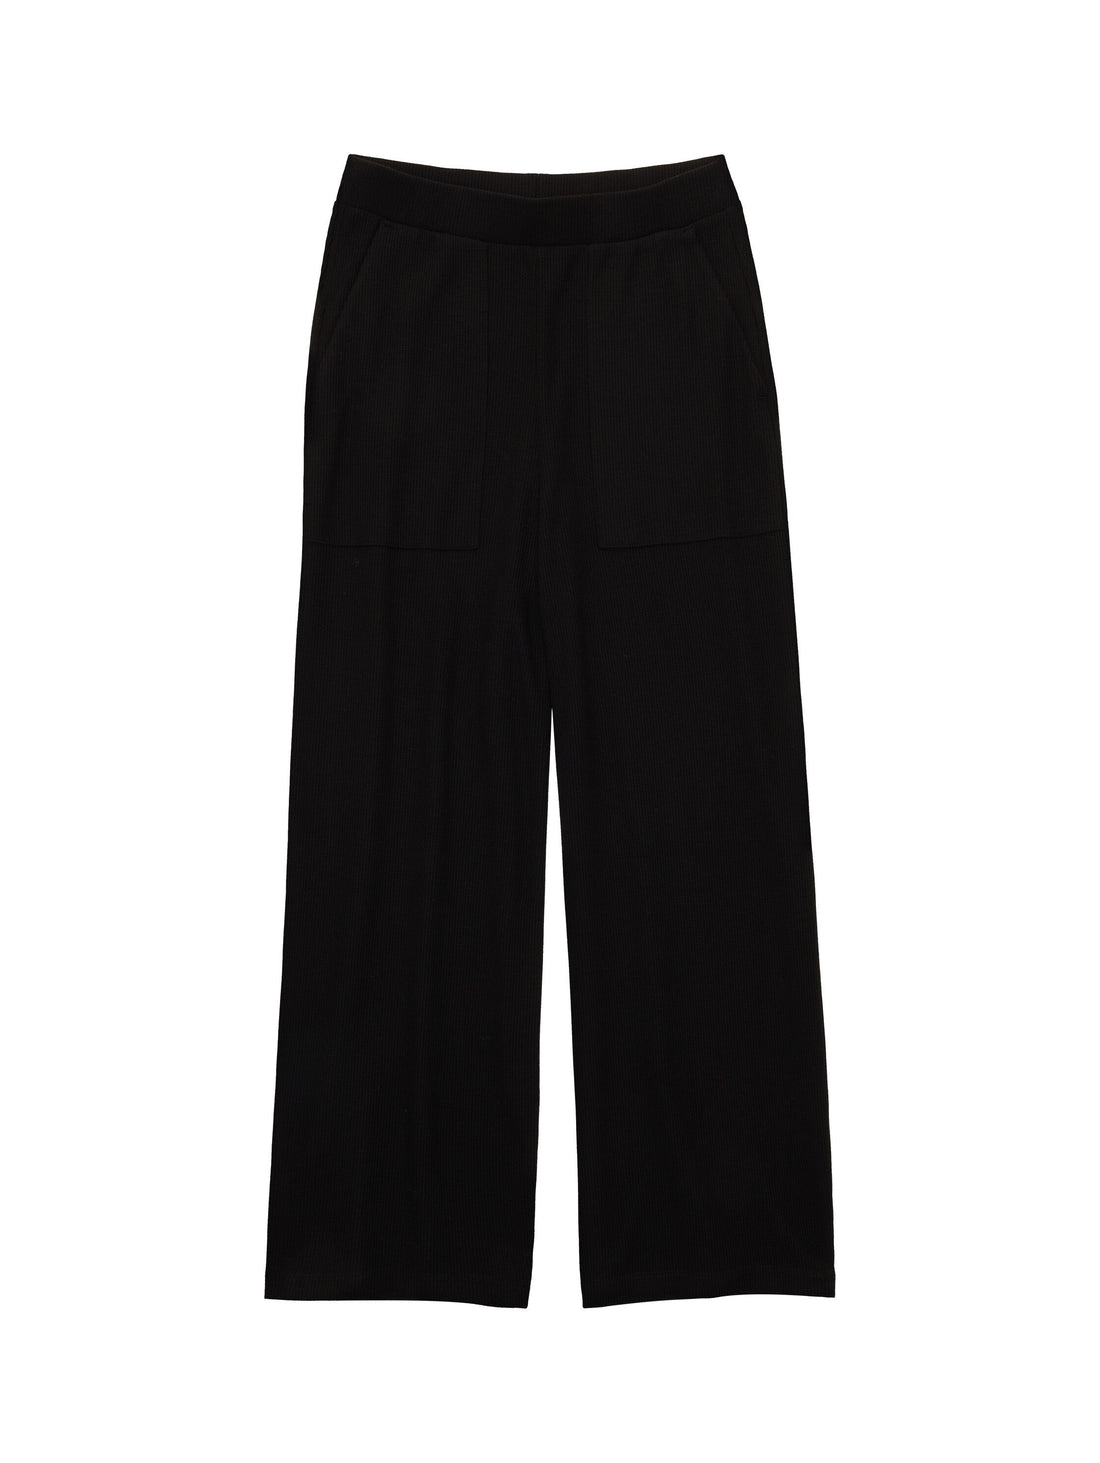 Cropped Slip On Trousers With Pockets_1038220_14482_01